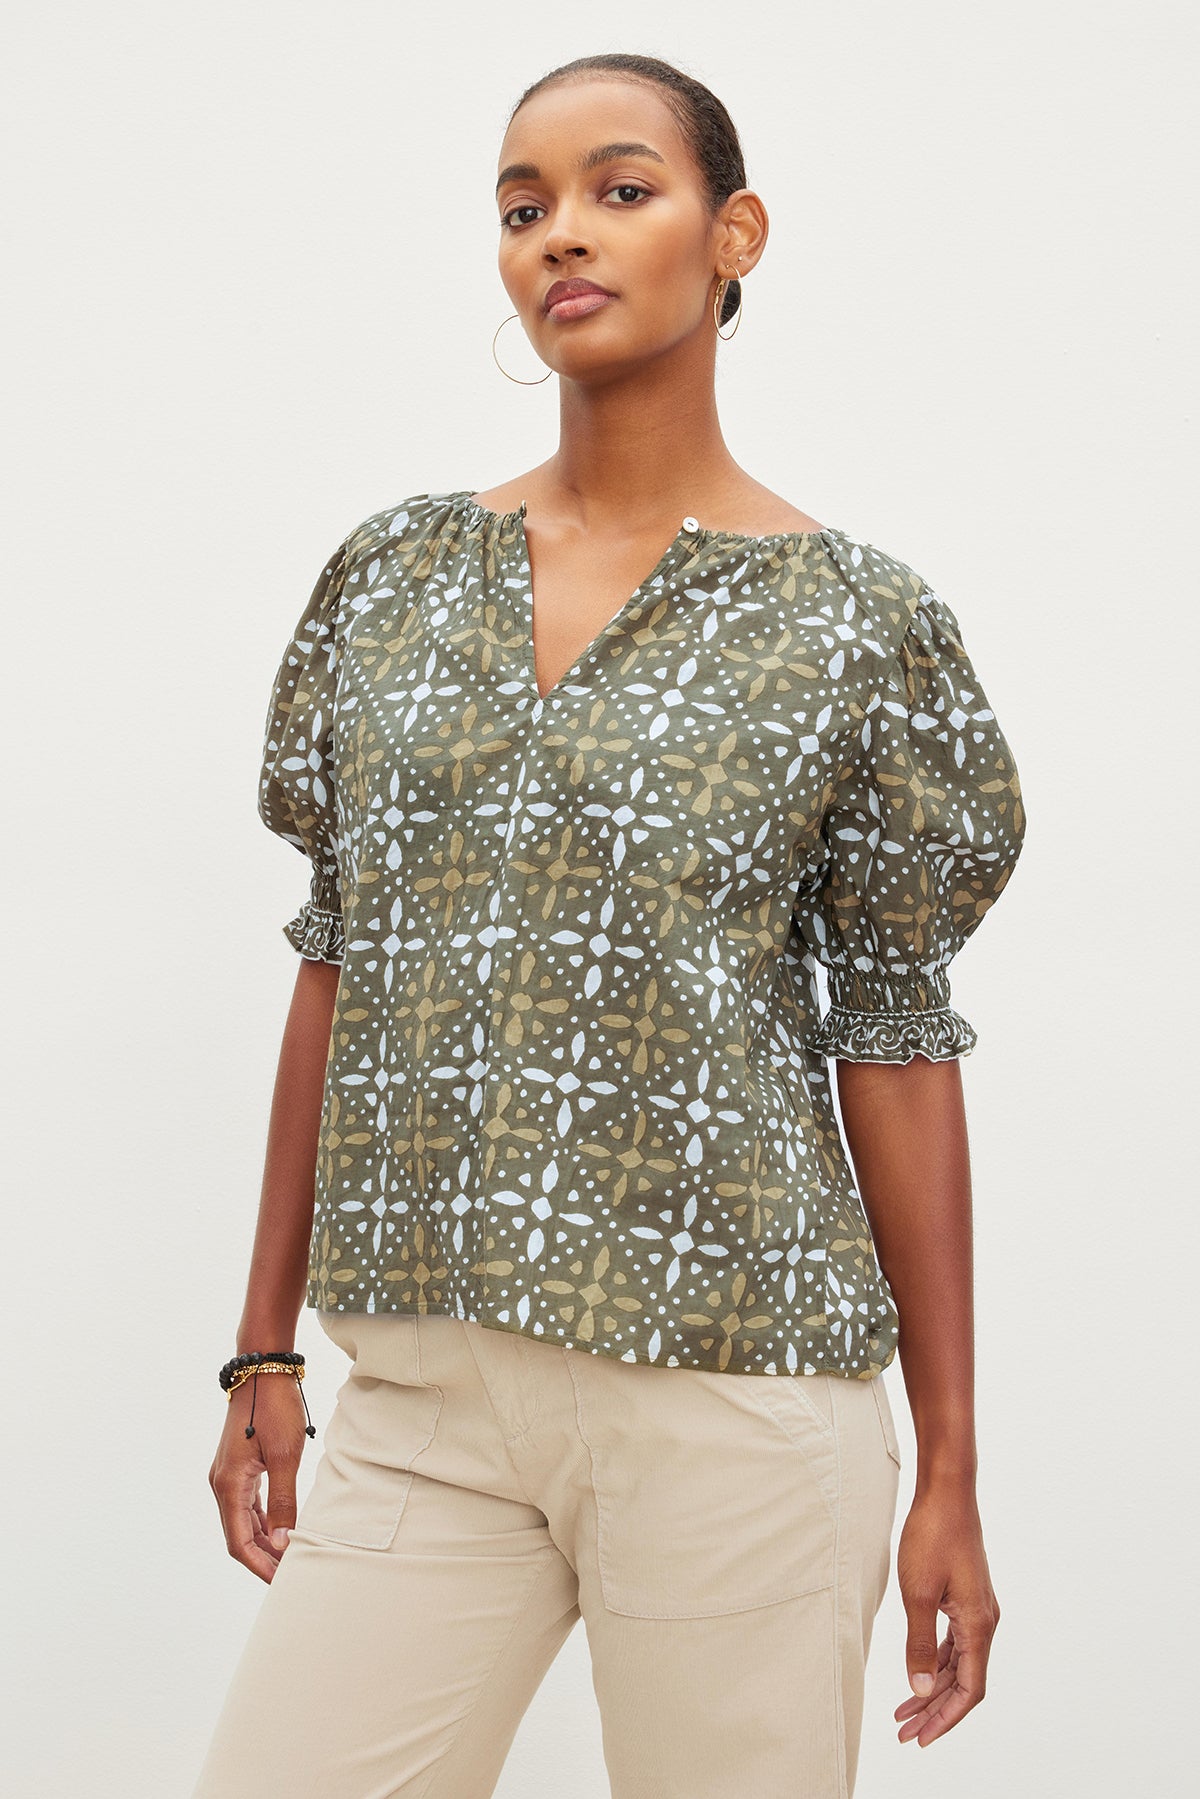 The model is wearing a Velvet by Graham & Spencer ALEX PRINTED BLOUSE with a puff sleeve.-26799976186049